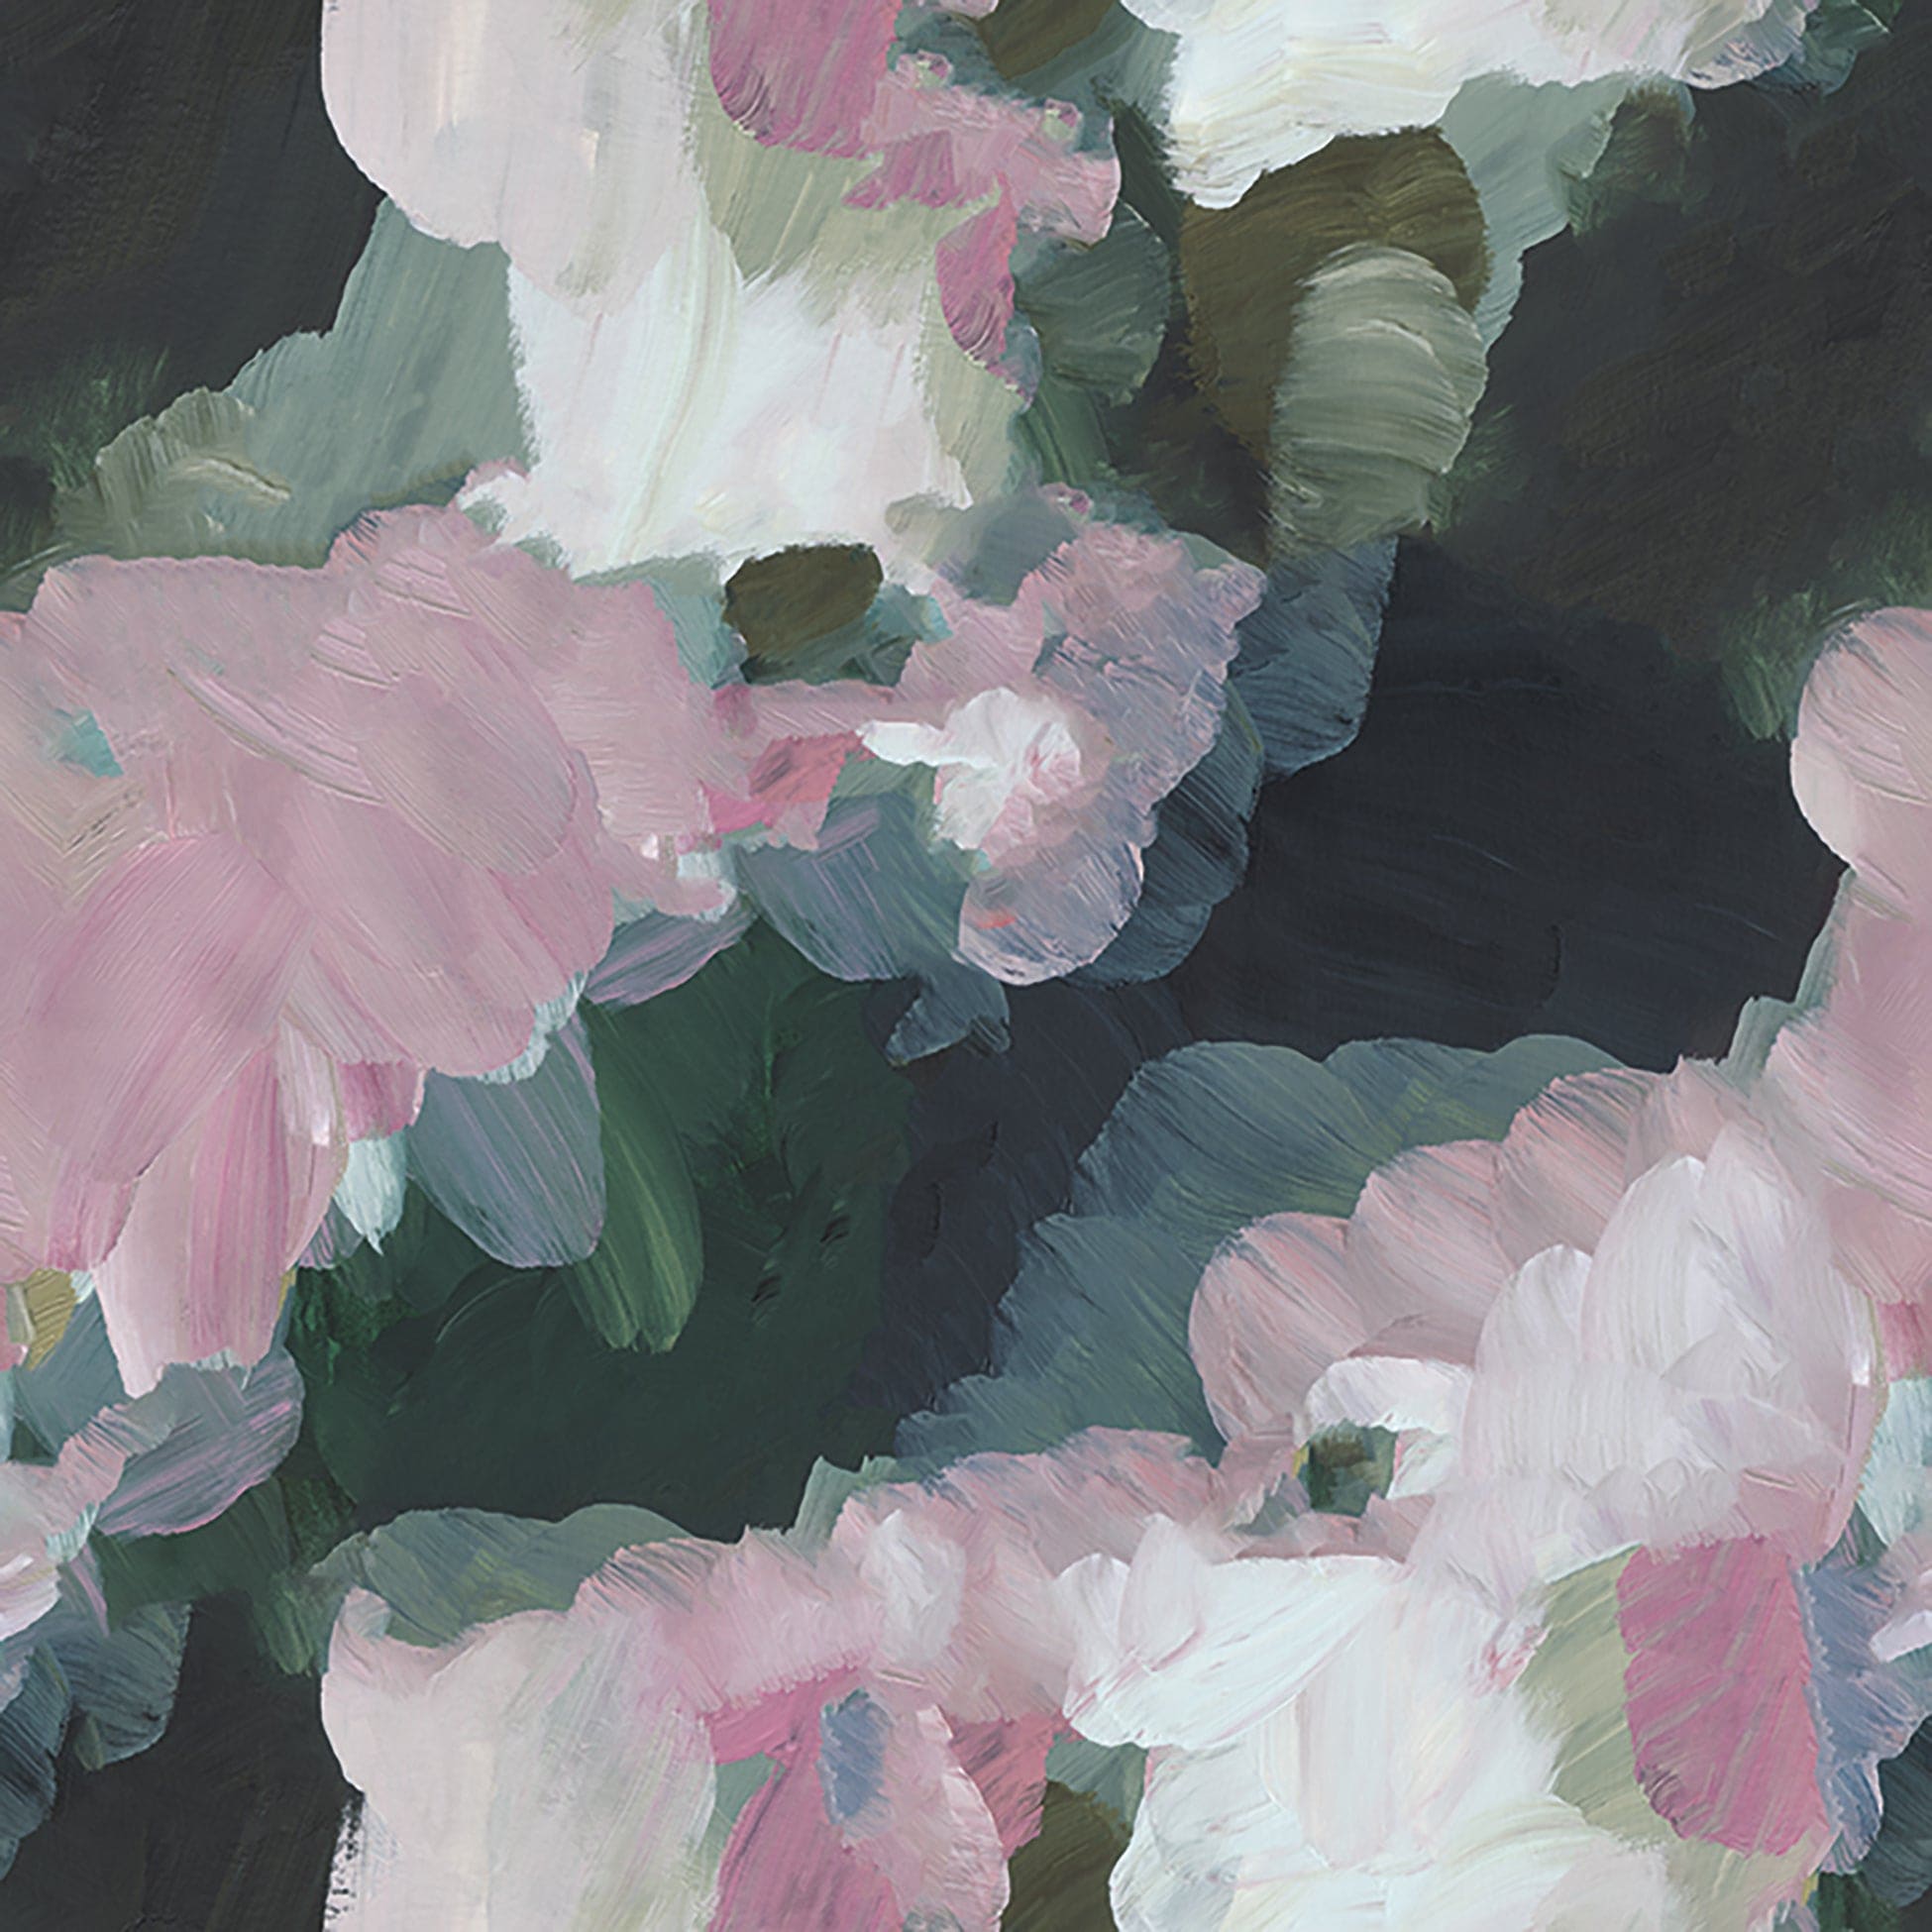 Close-up of the Brushed Harmony Wallpaper featuring an abstract floral design with soft brush strokes in shades of pink and green against a dark background, evoking a serene and artistic ambiance